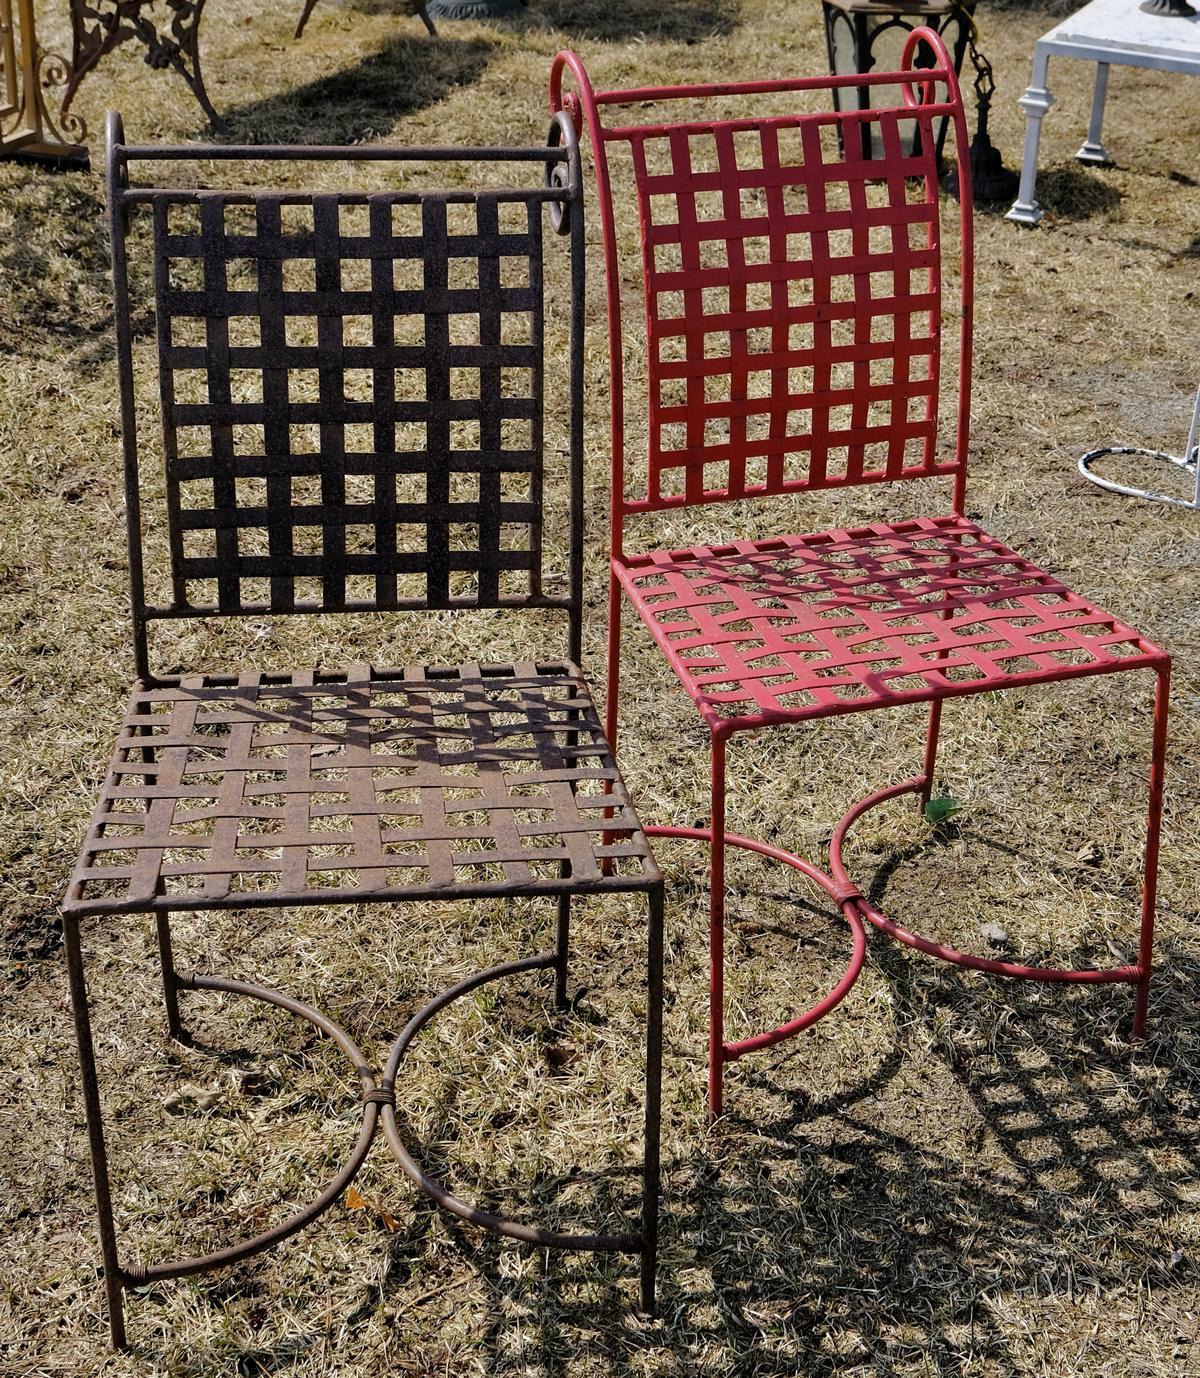 TWO PATIO CHAIRS